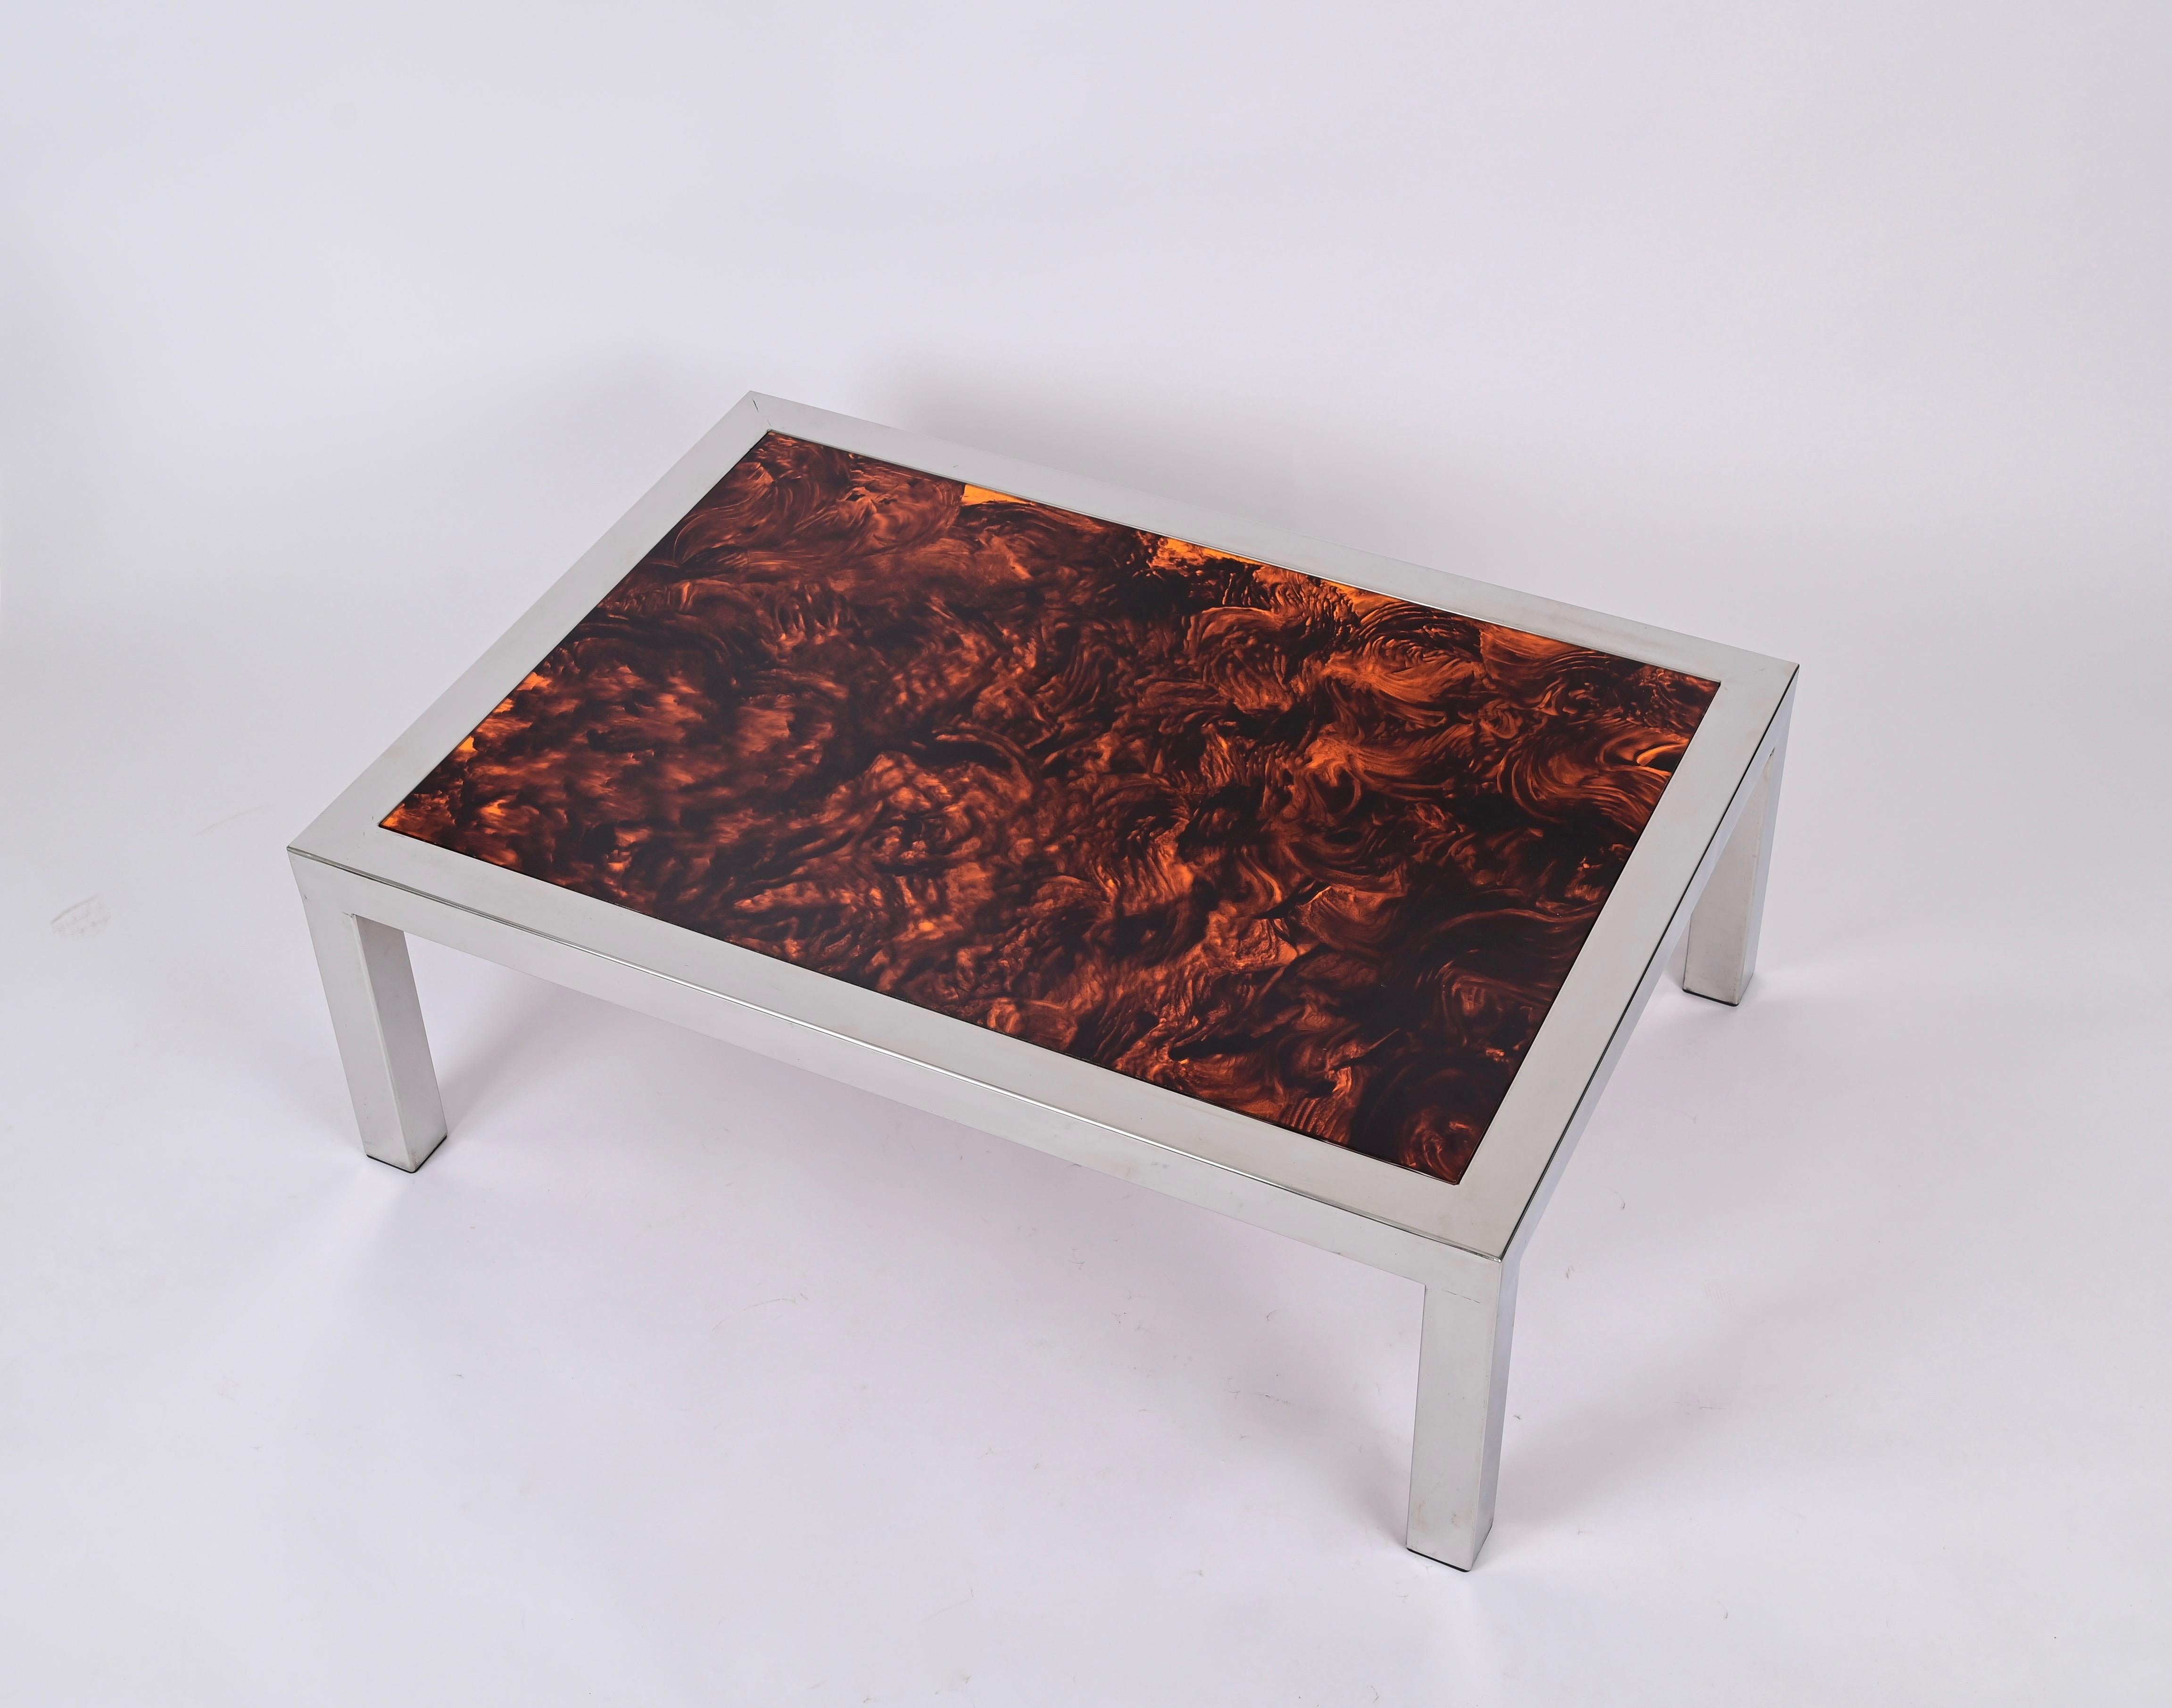 Chromed Steel and Tortoiseshell Effect Lucite Coffee Table, Italy 1970s For Sale 1